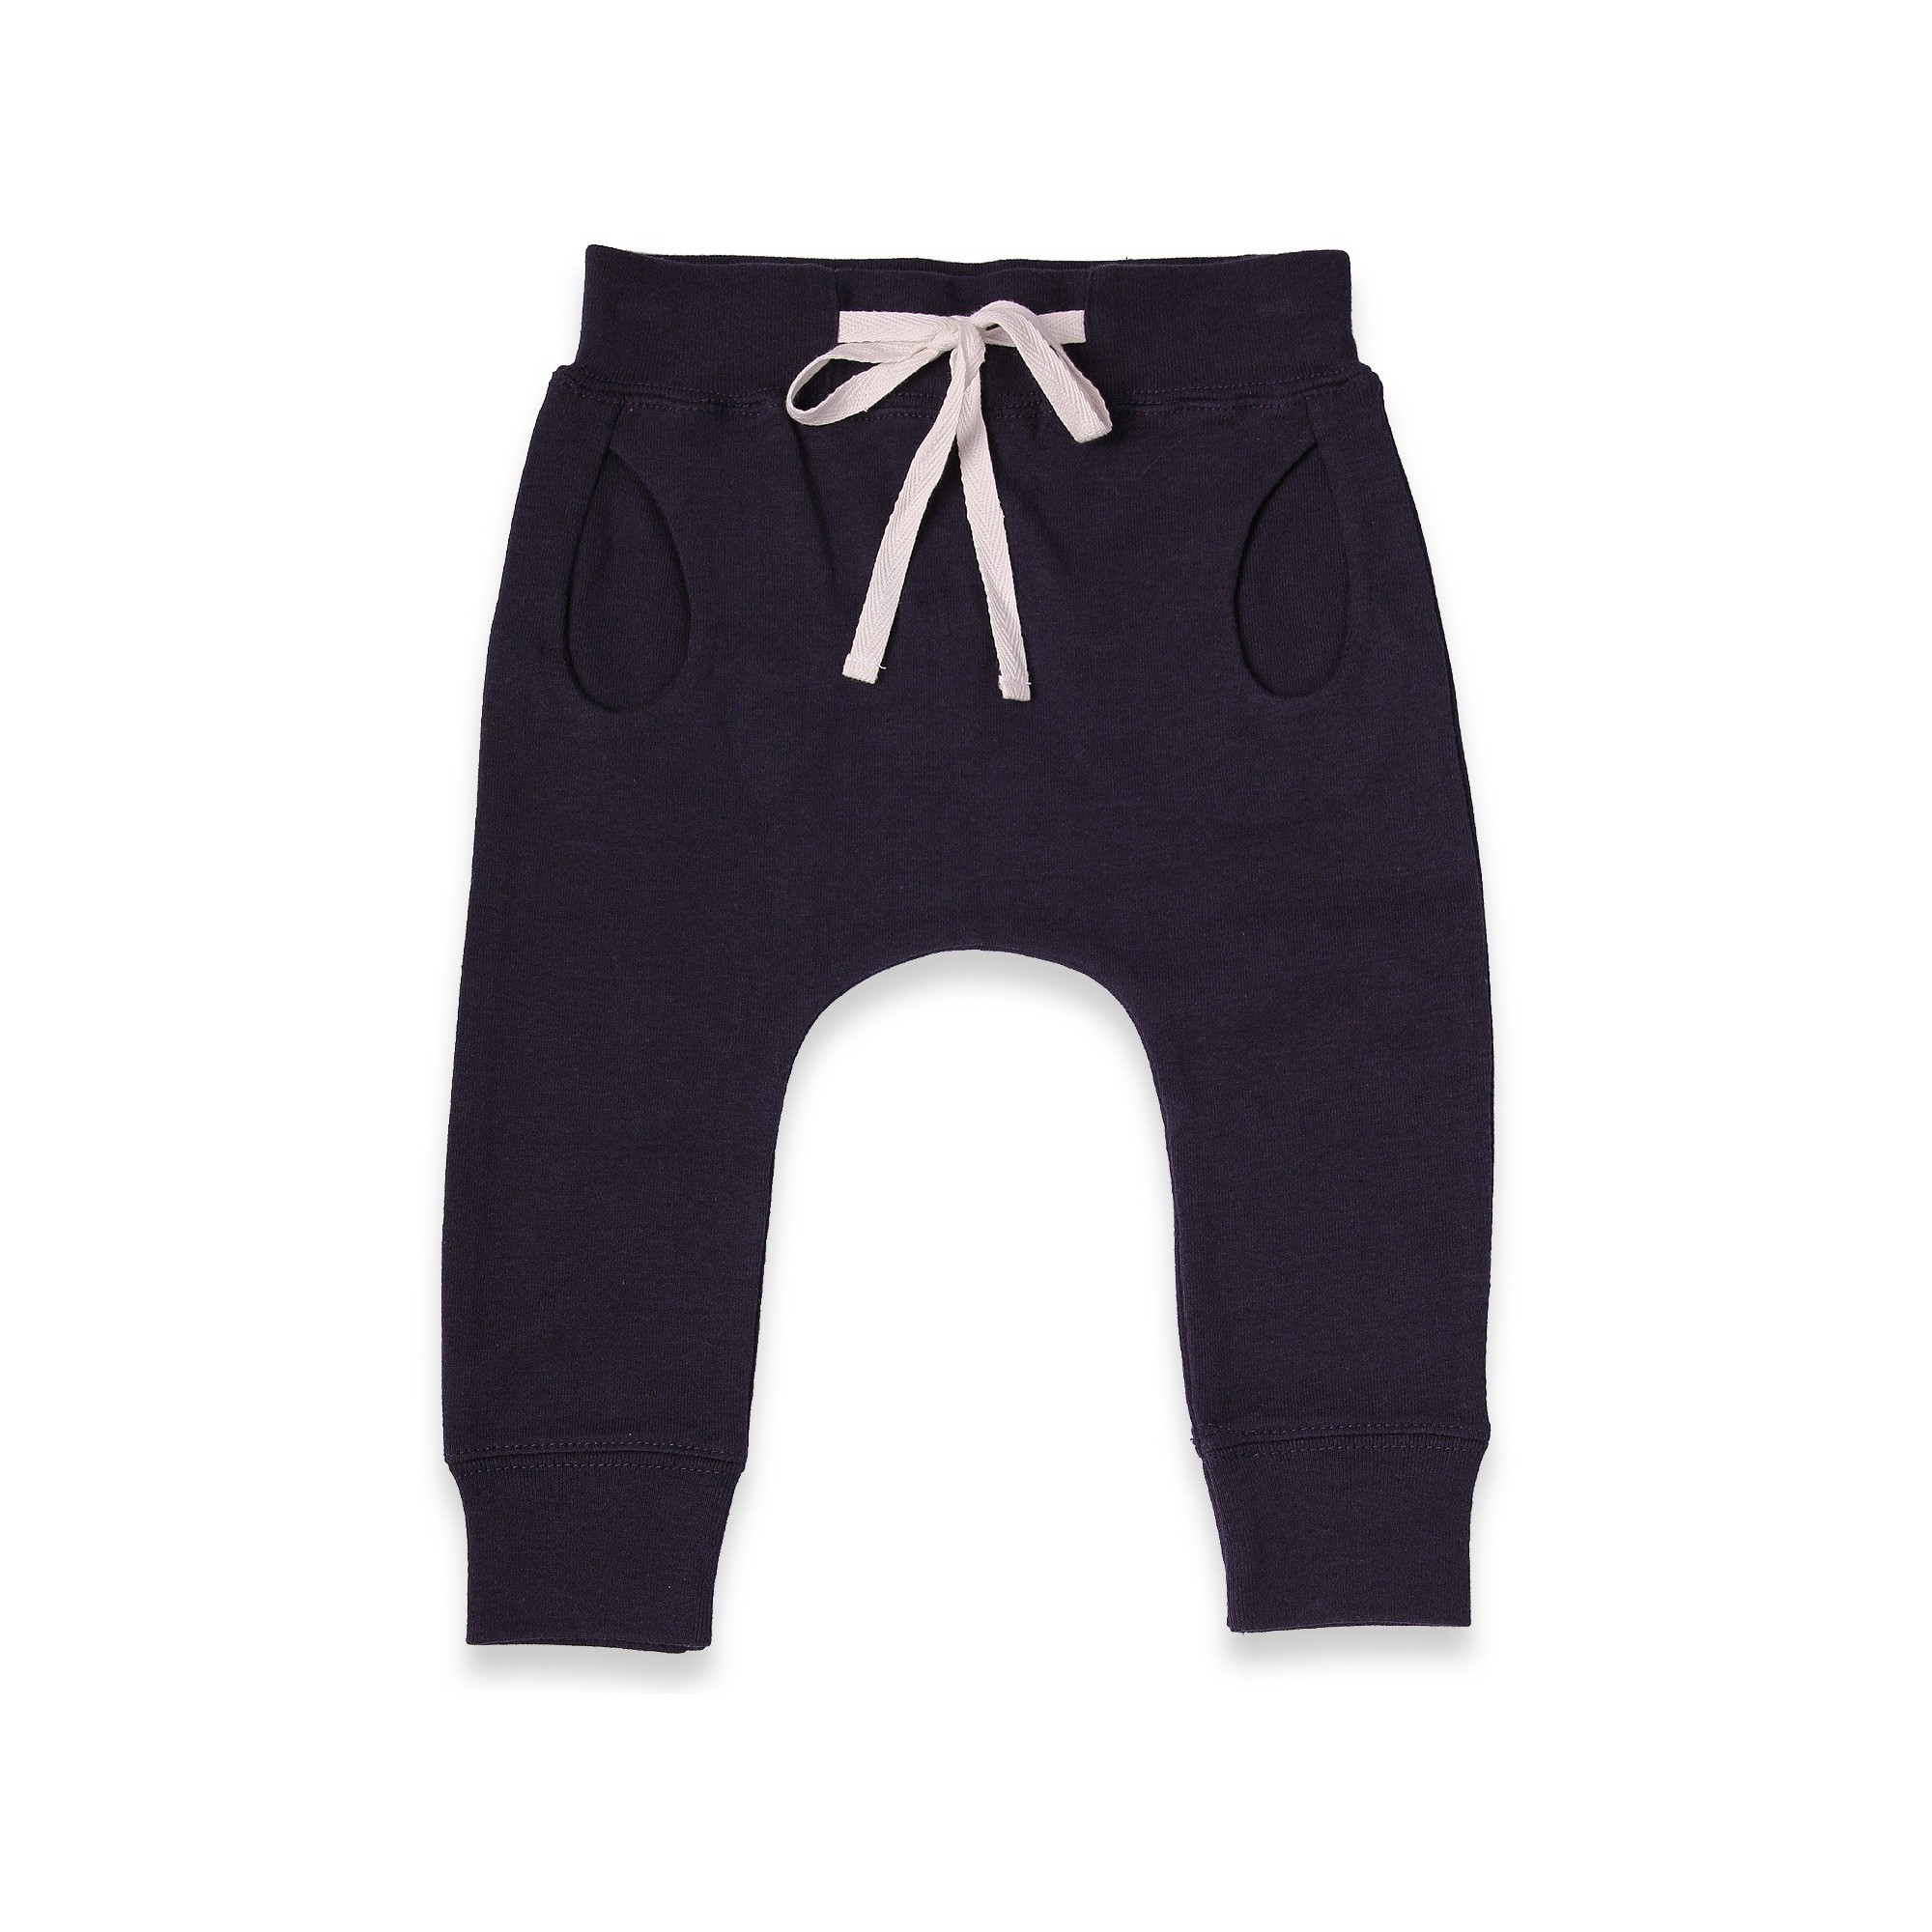 Cotton collection - Navy blue jogging pants for babies & toddler ...